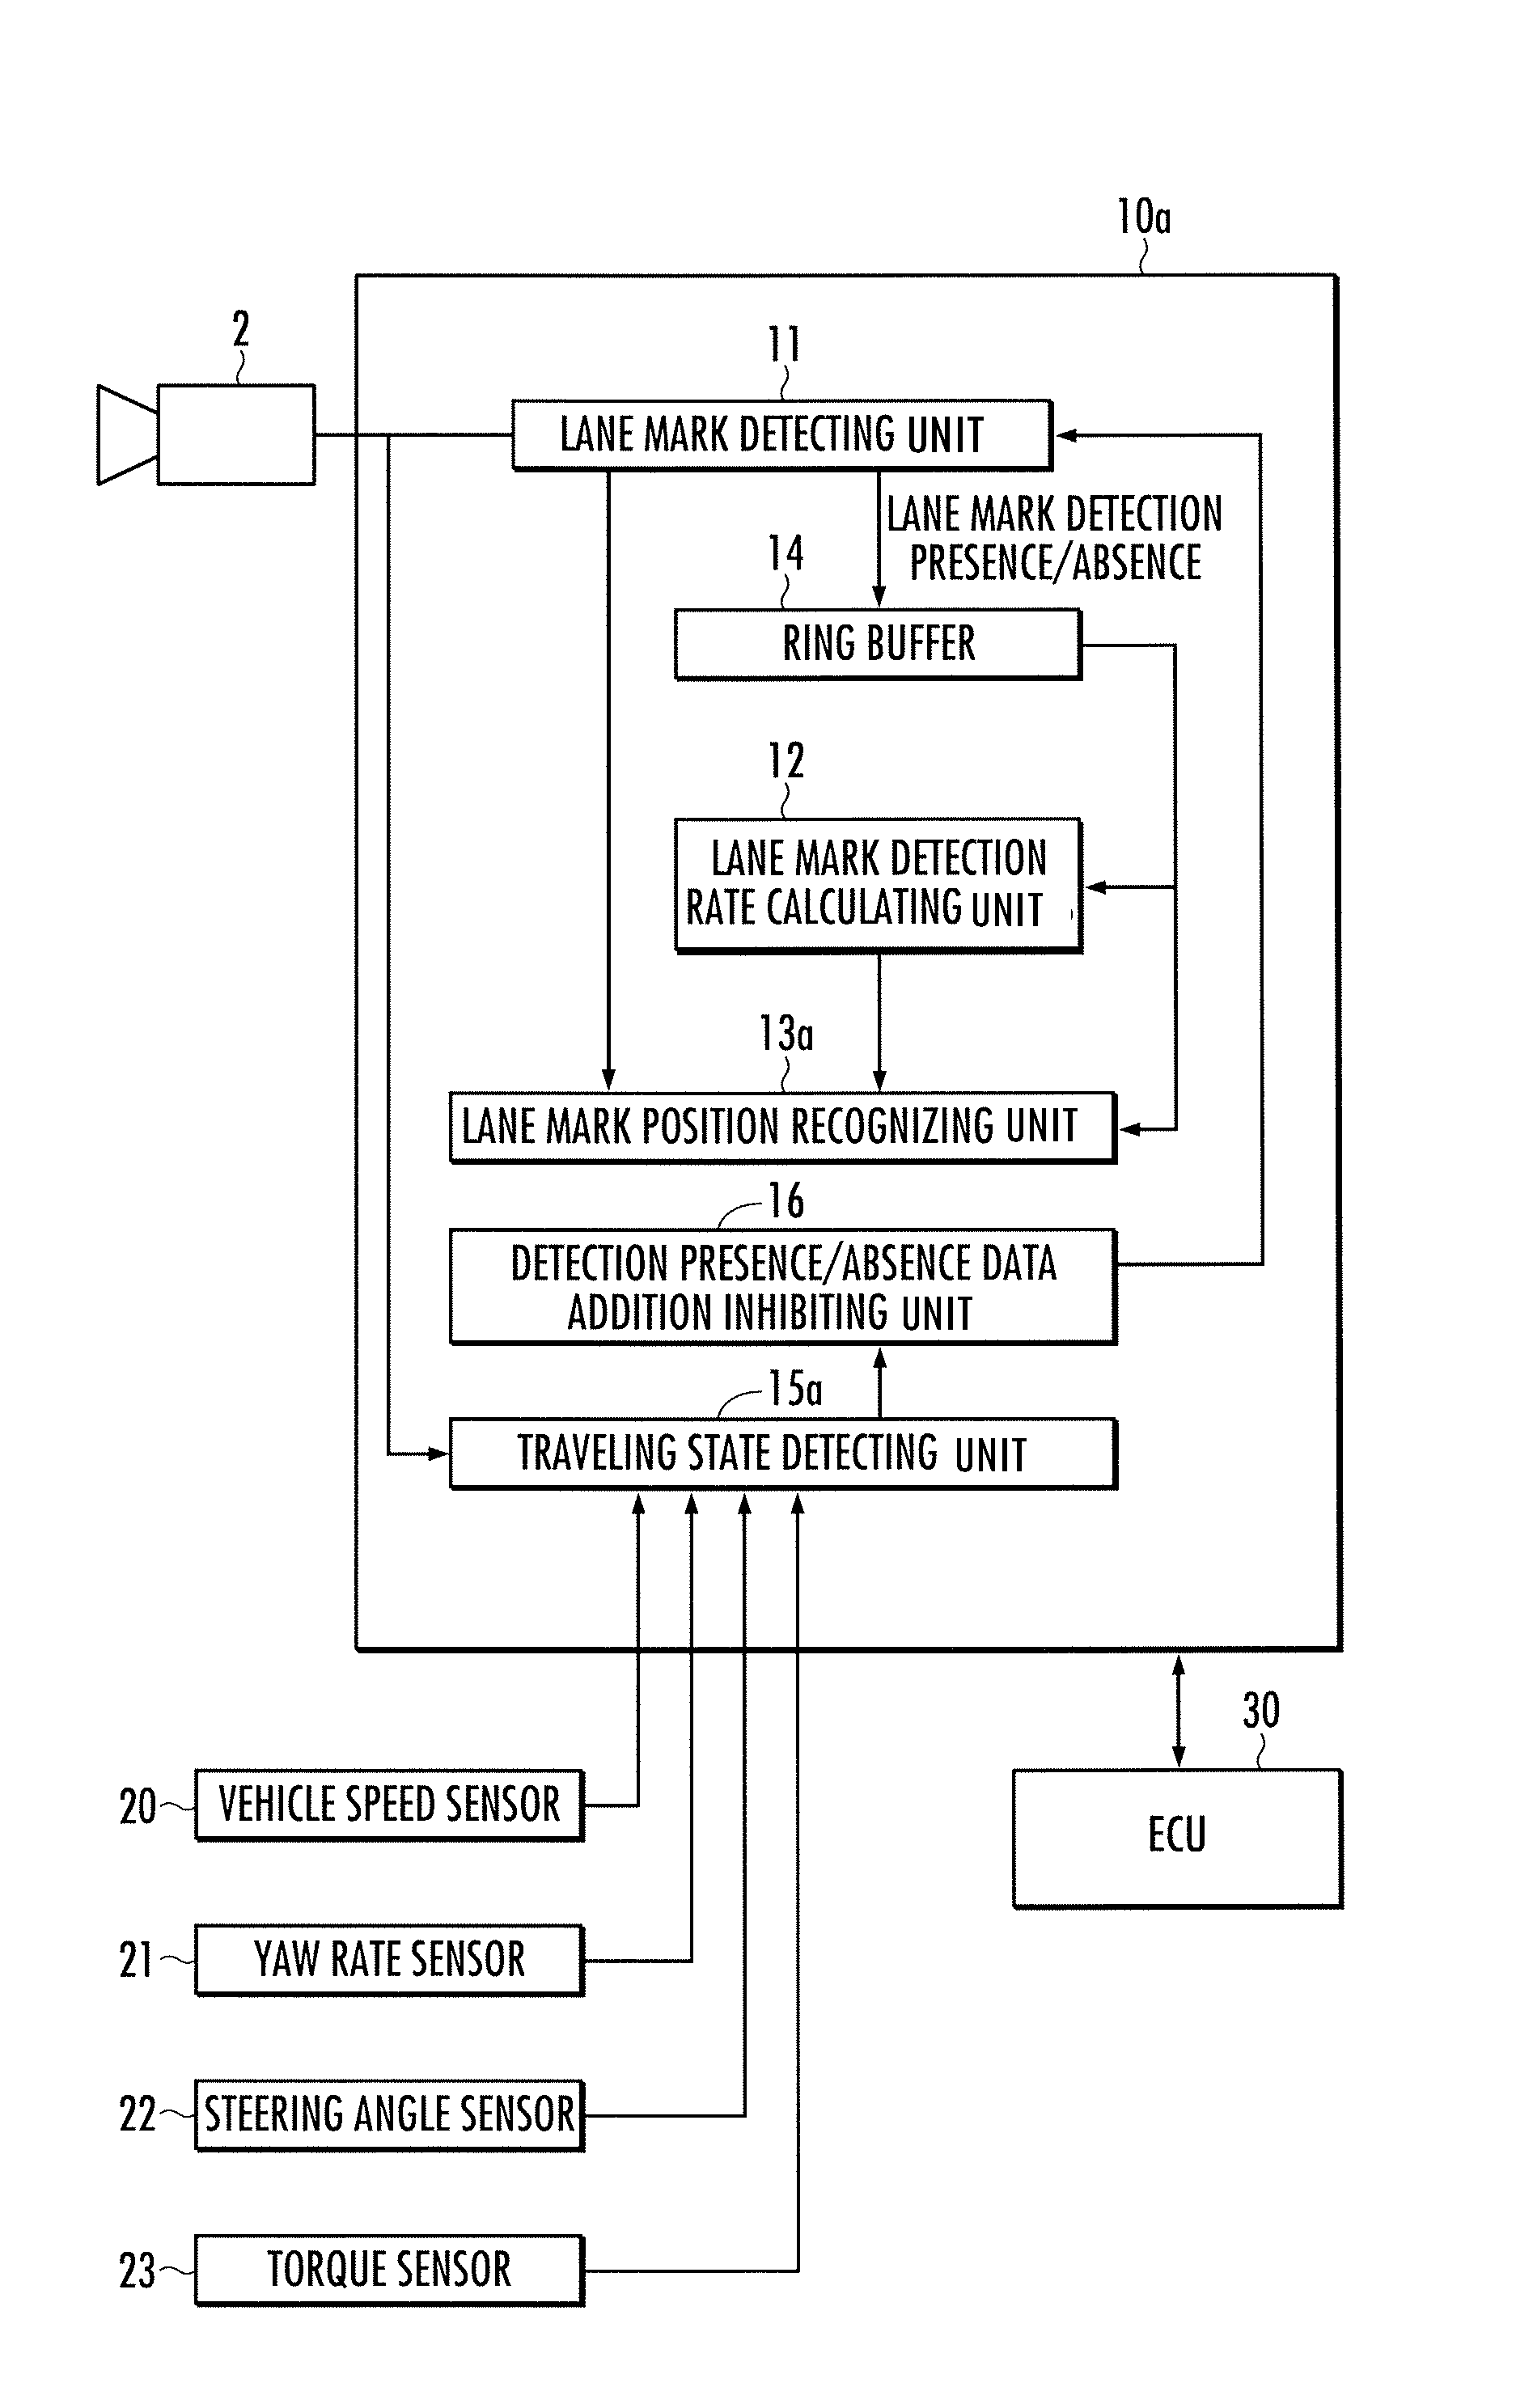 Lane recognition device